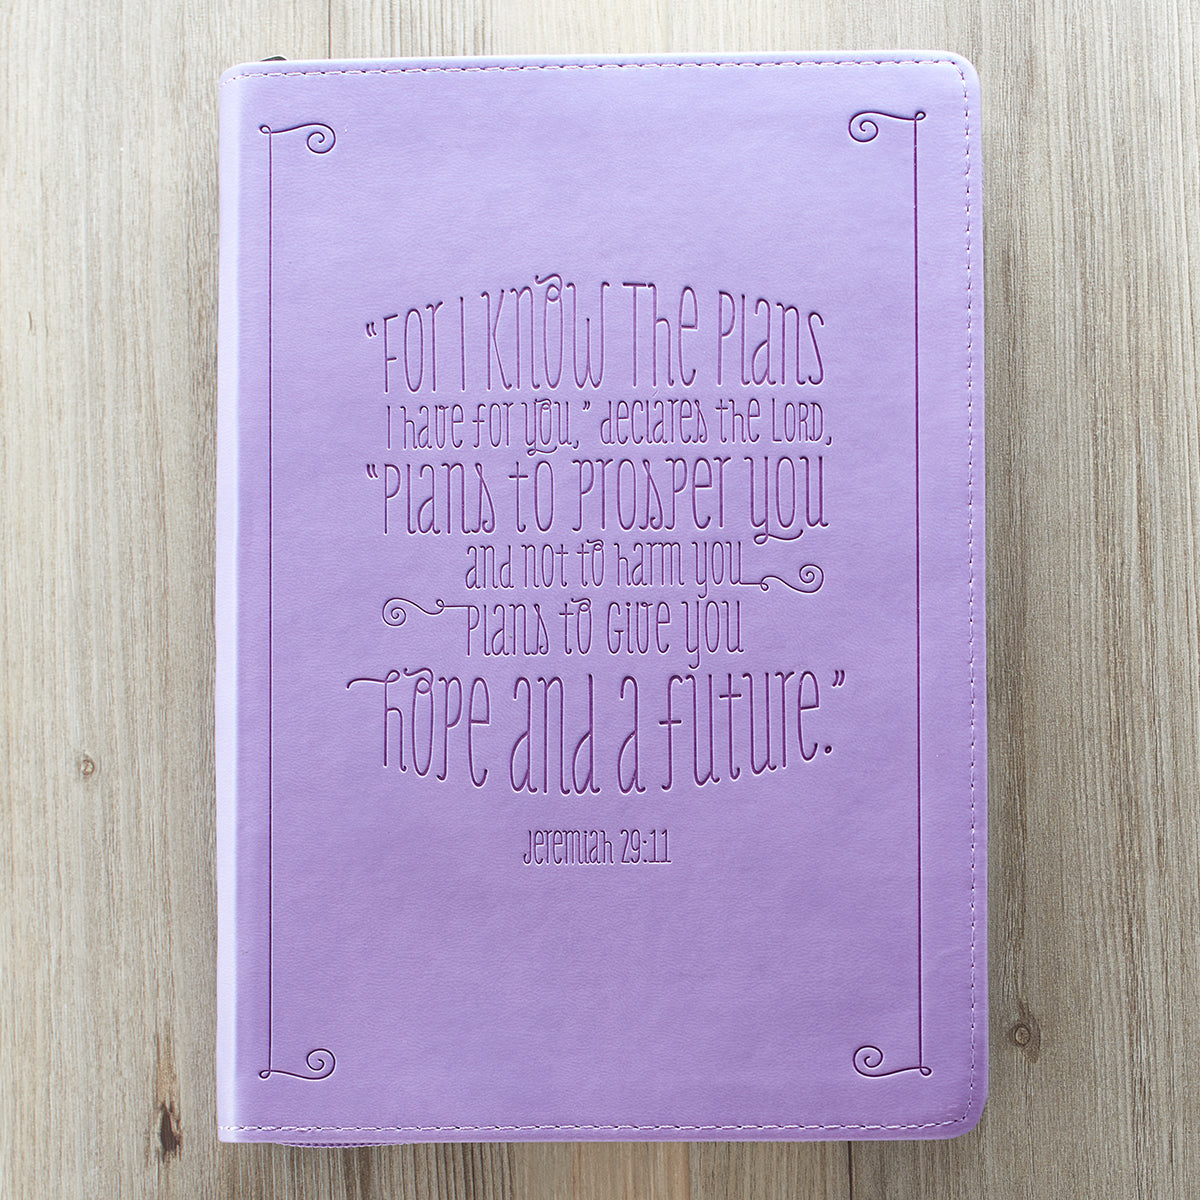 Image of Jeremiah 29:11 Zippered Purple Flexcover Journal other